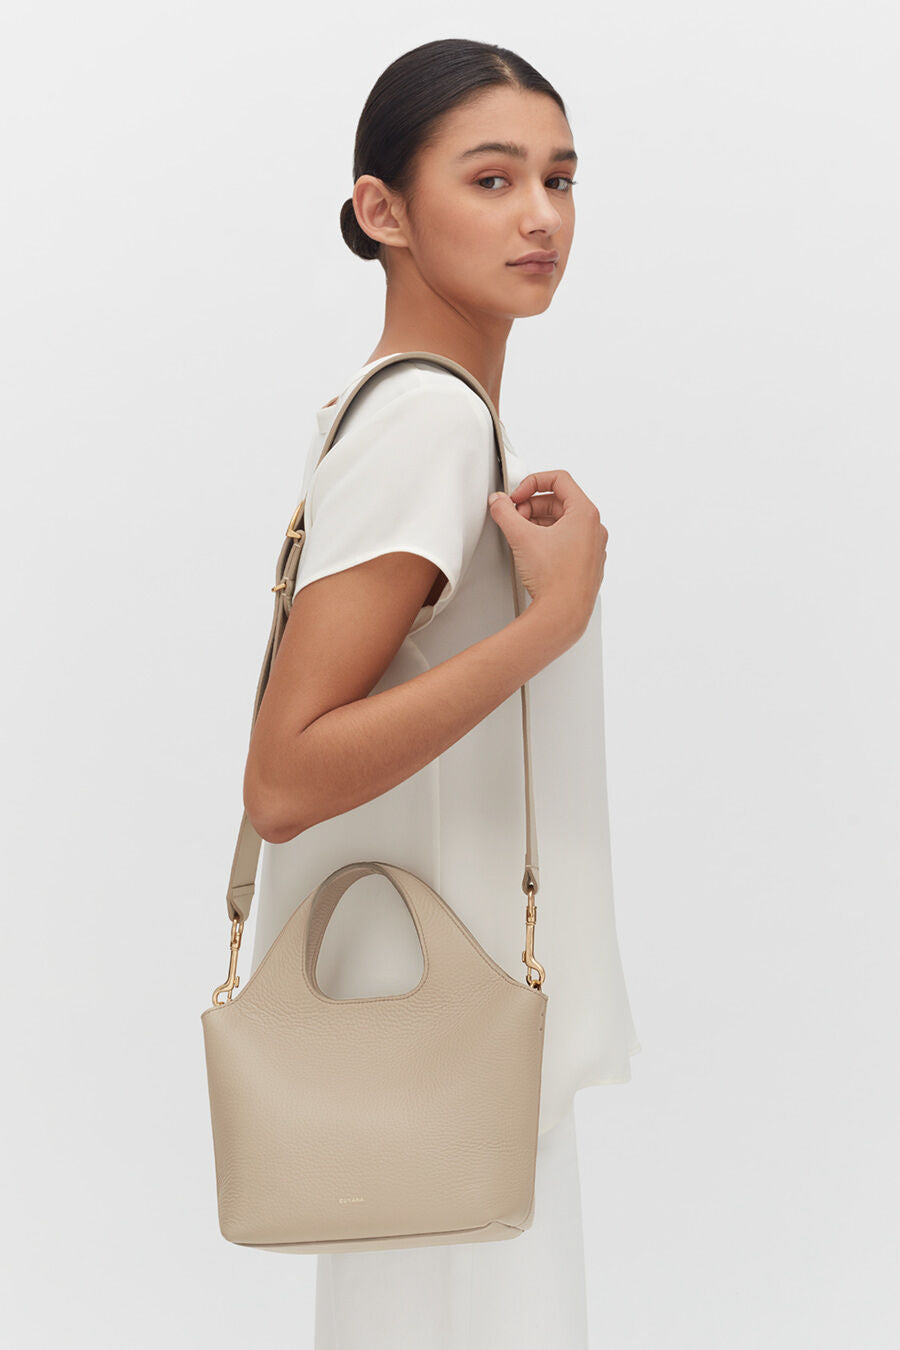 Woman standing with a shoulder bag, looking over her shoulder.